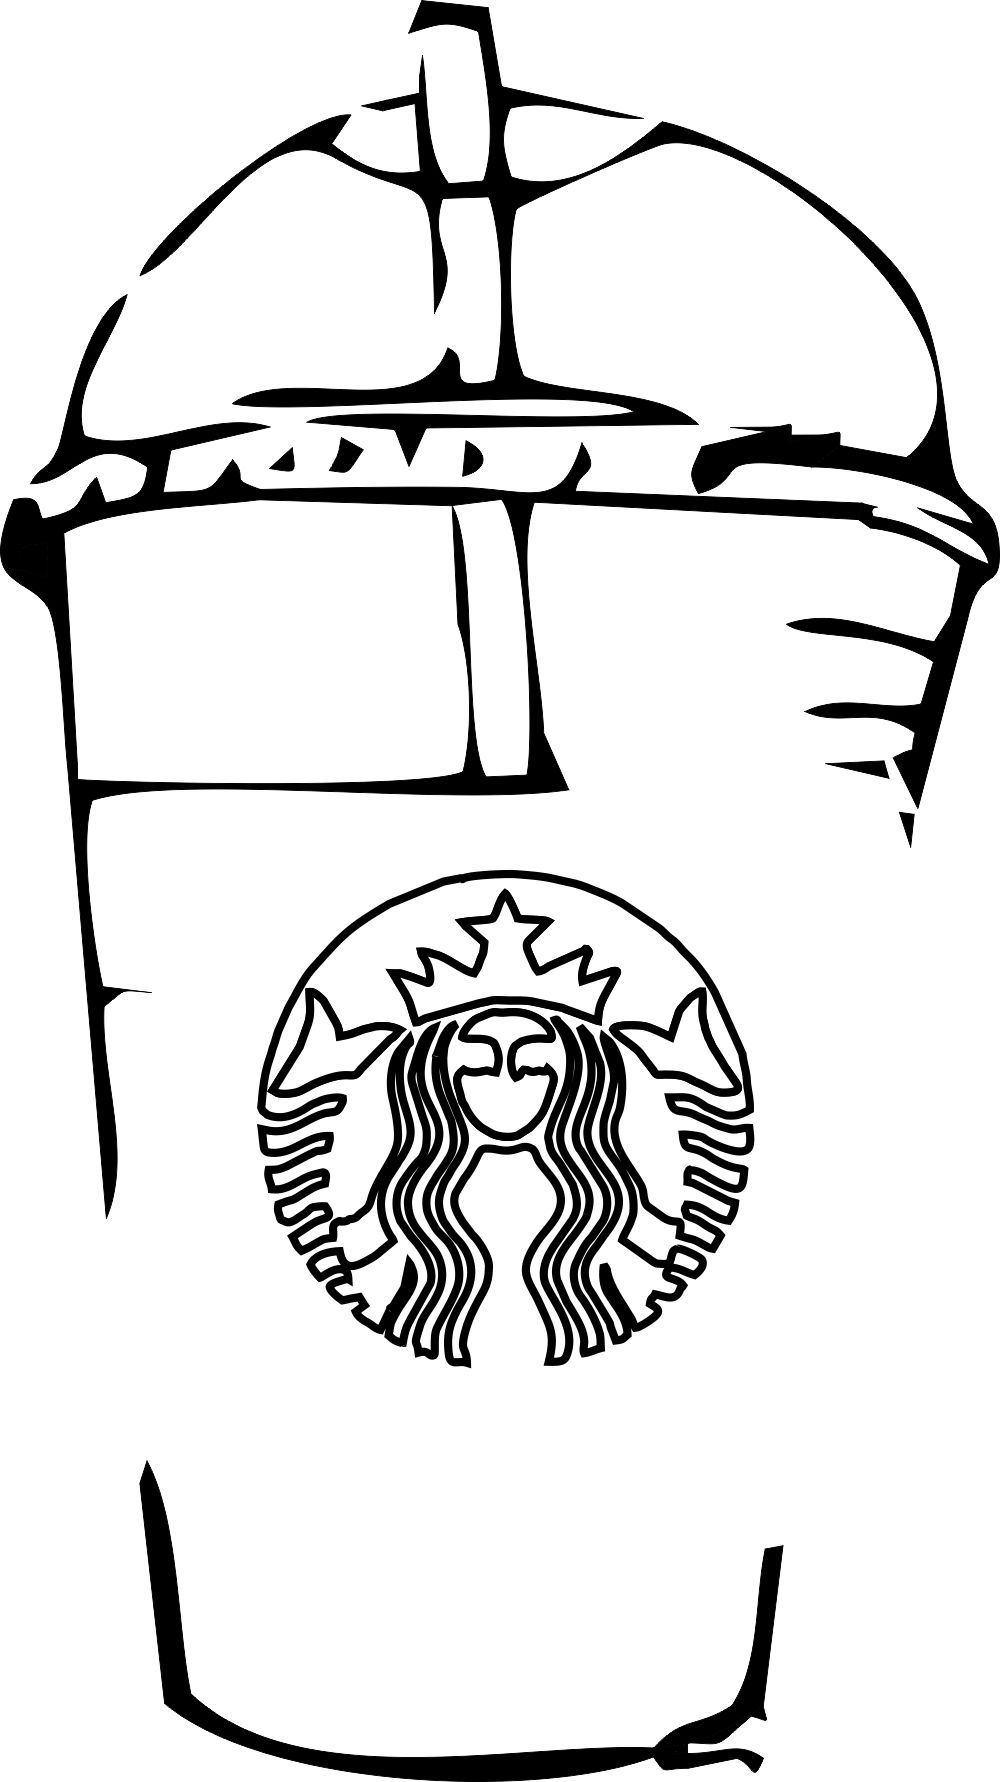 starbucks coloring page simple.